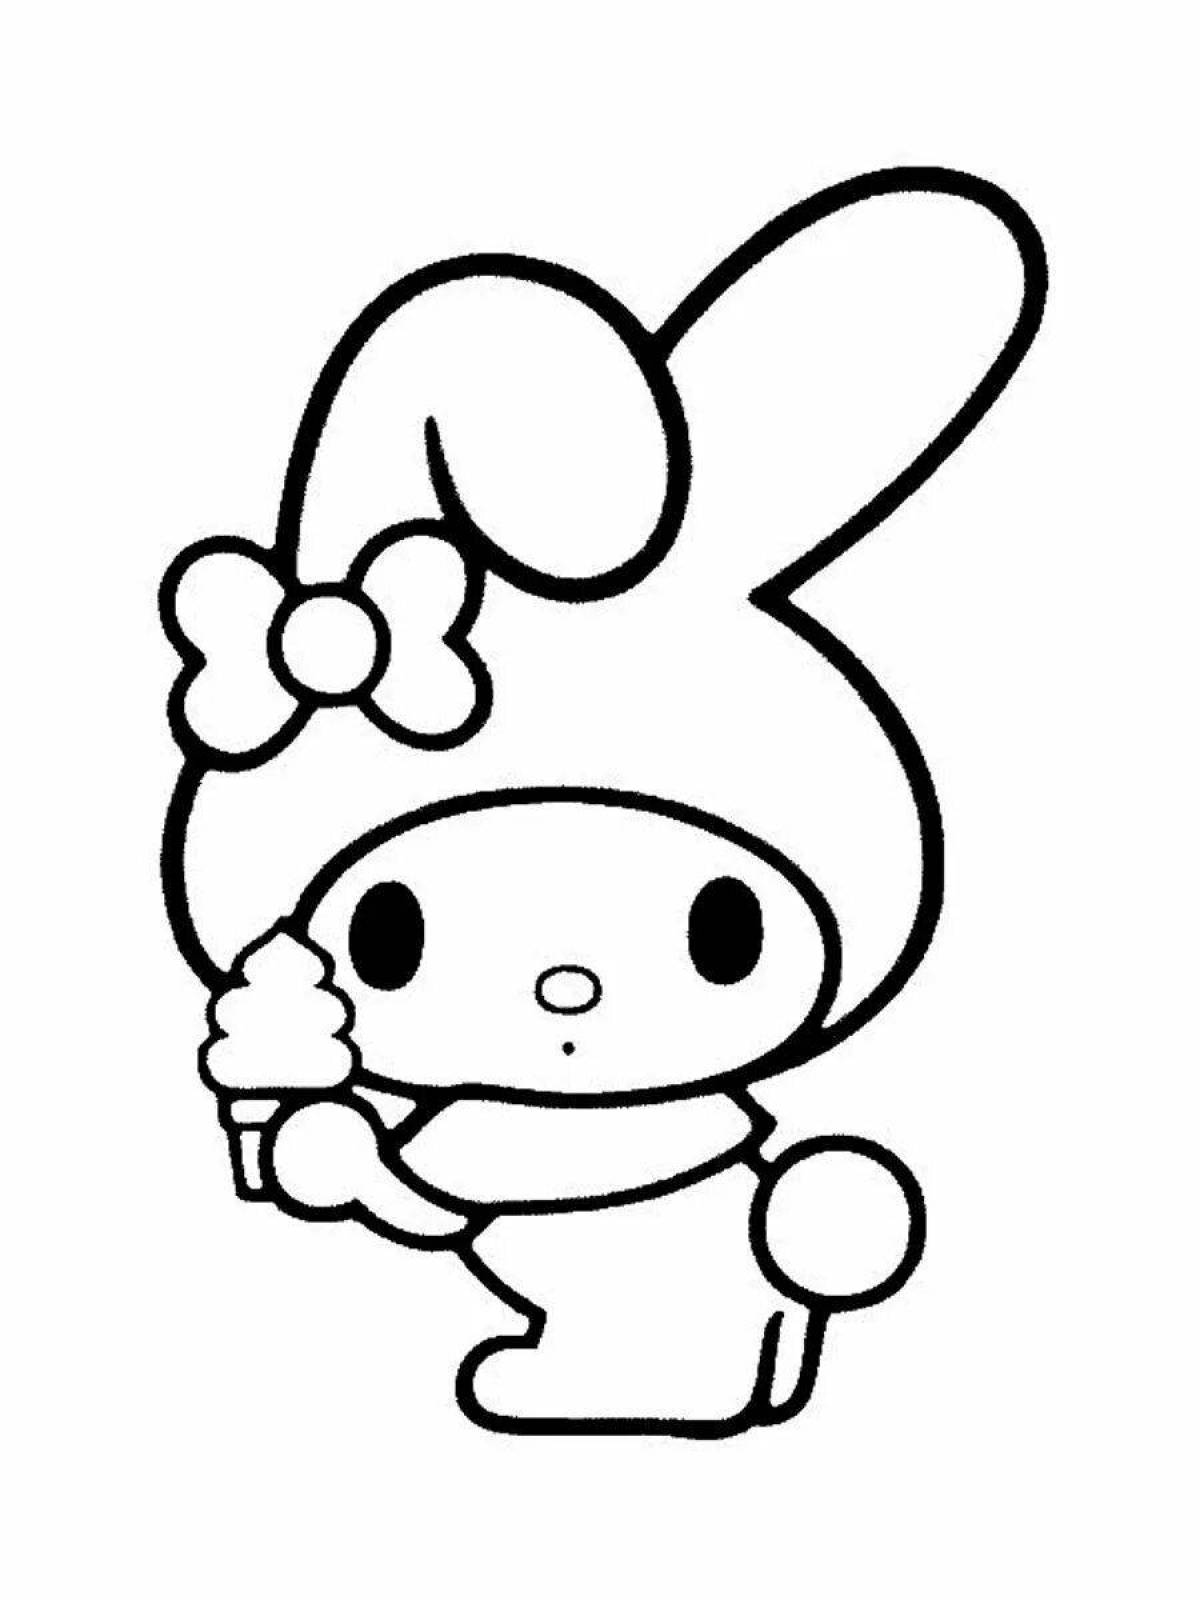 Great coloring hello kitty black and white kuromi